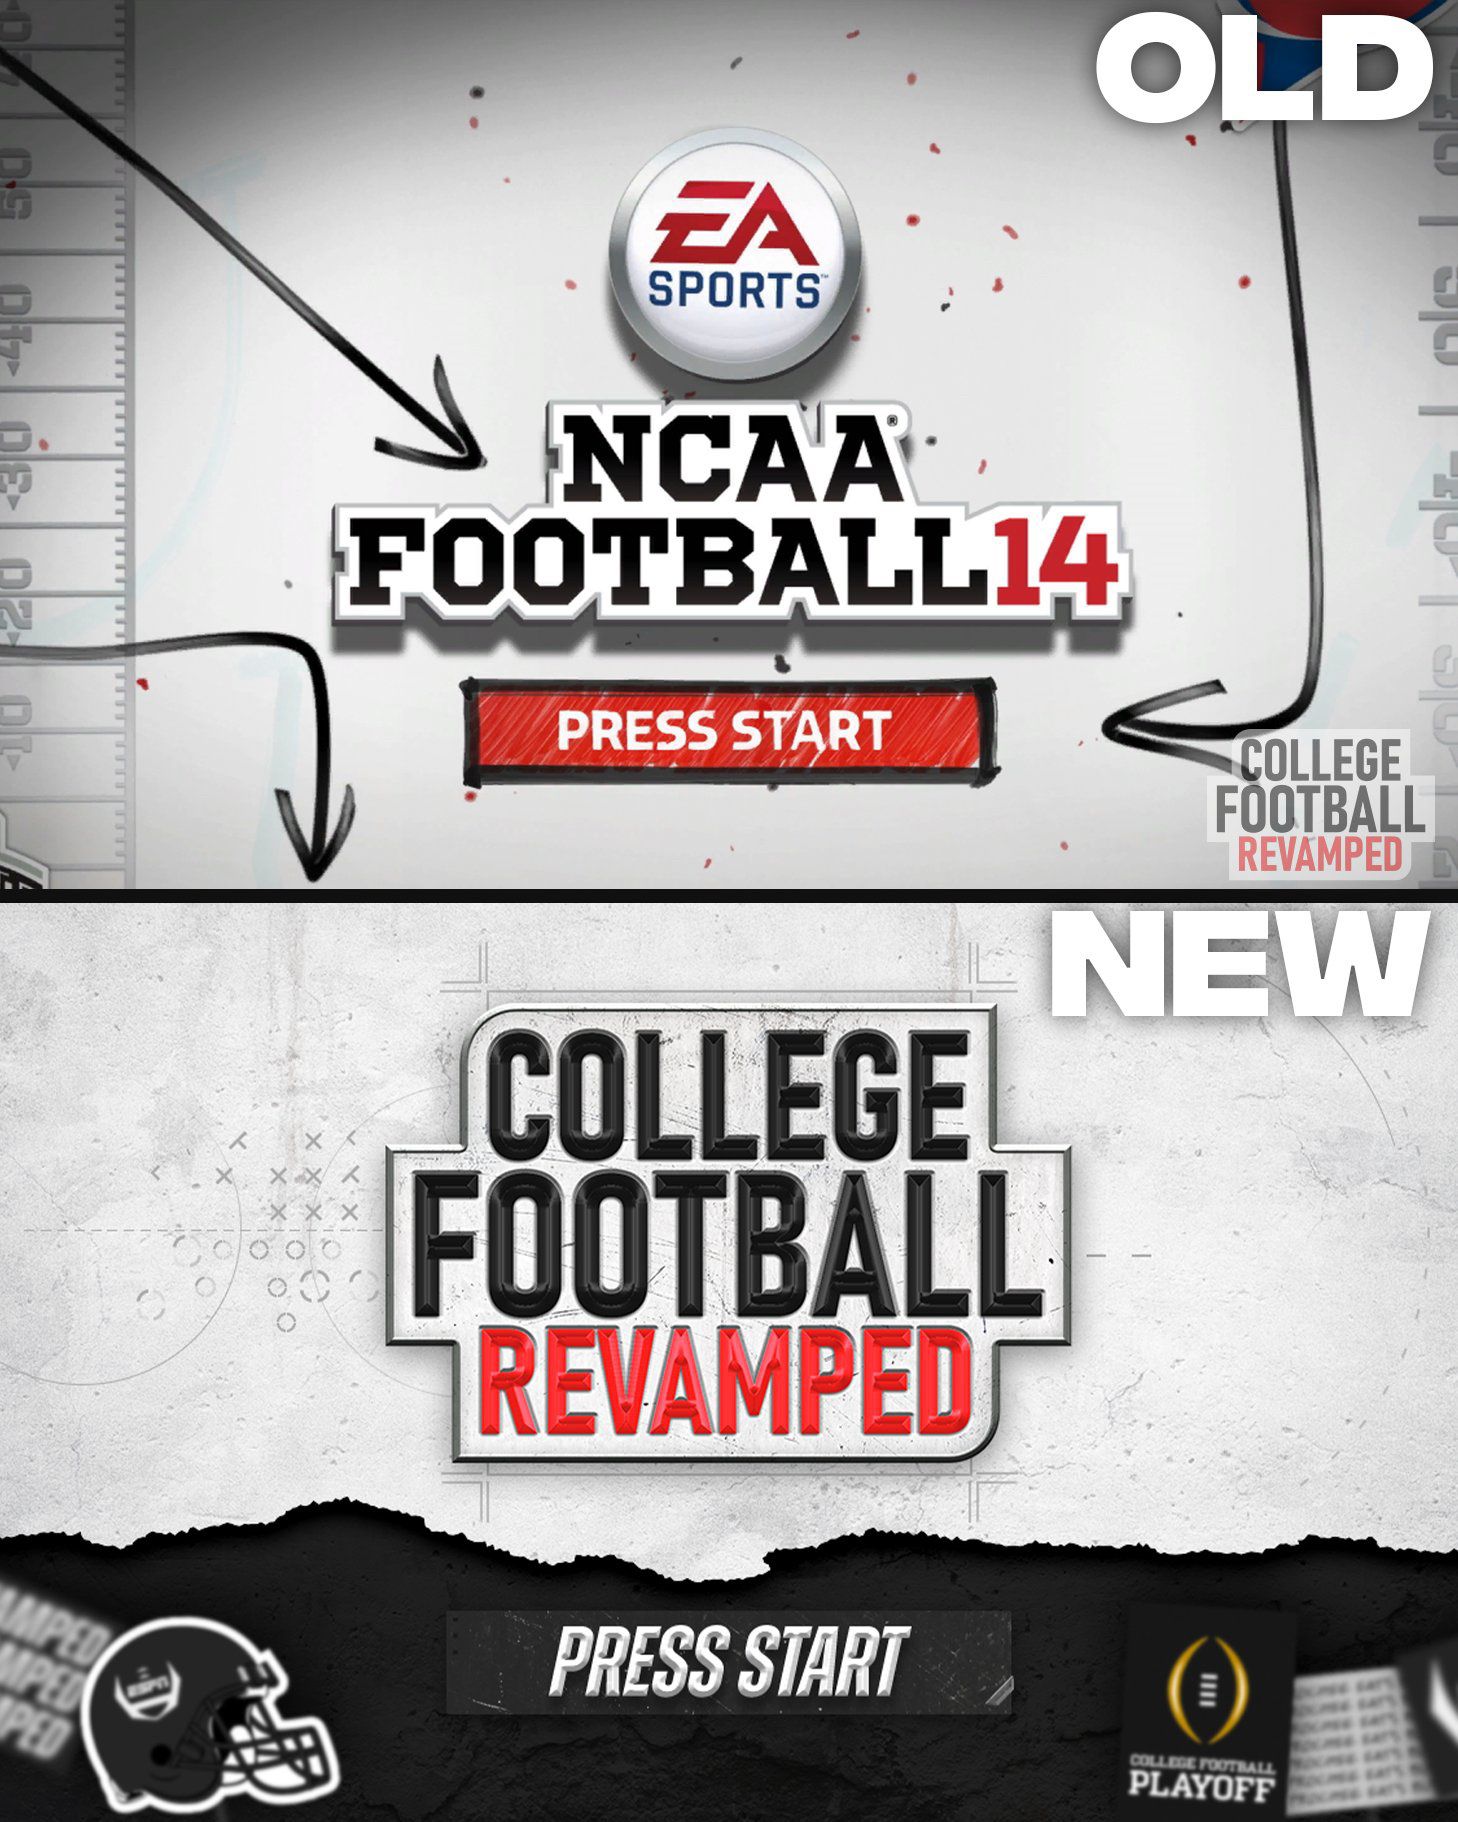 Ps3 with college football revamped v21 + NCAA March Madness legacy V5 + NCAA 2k8